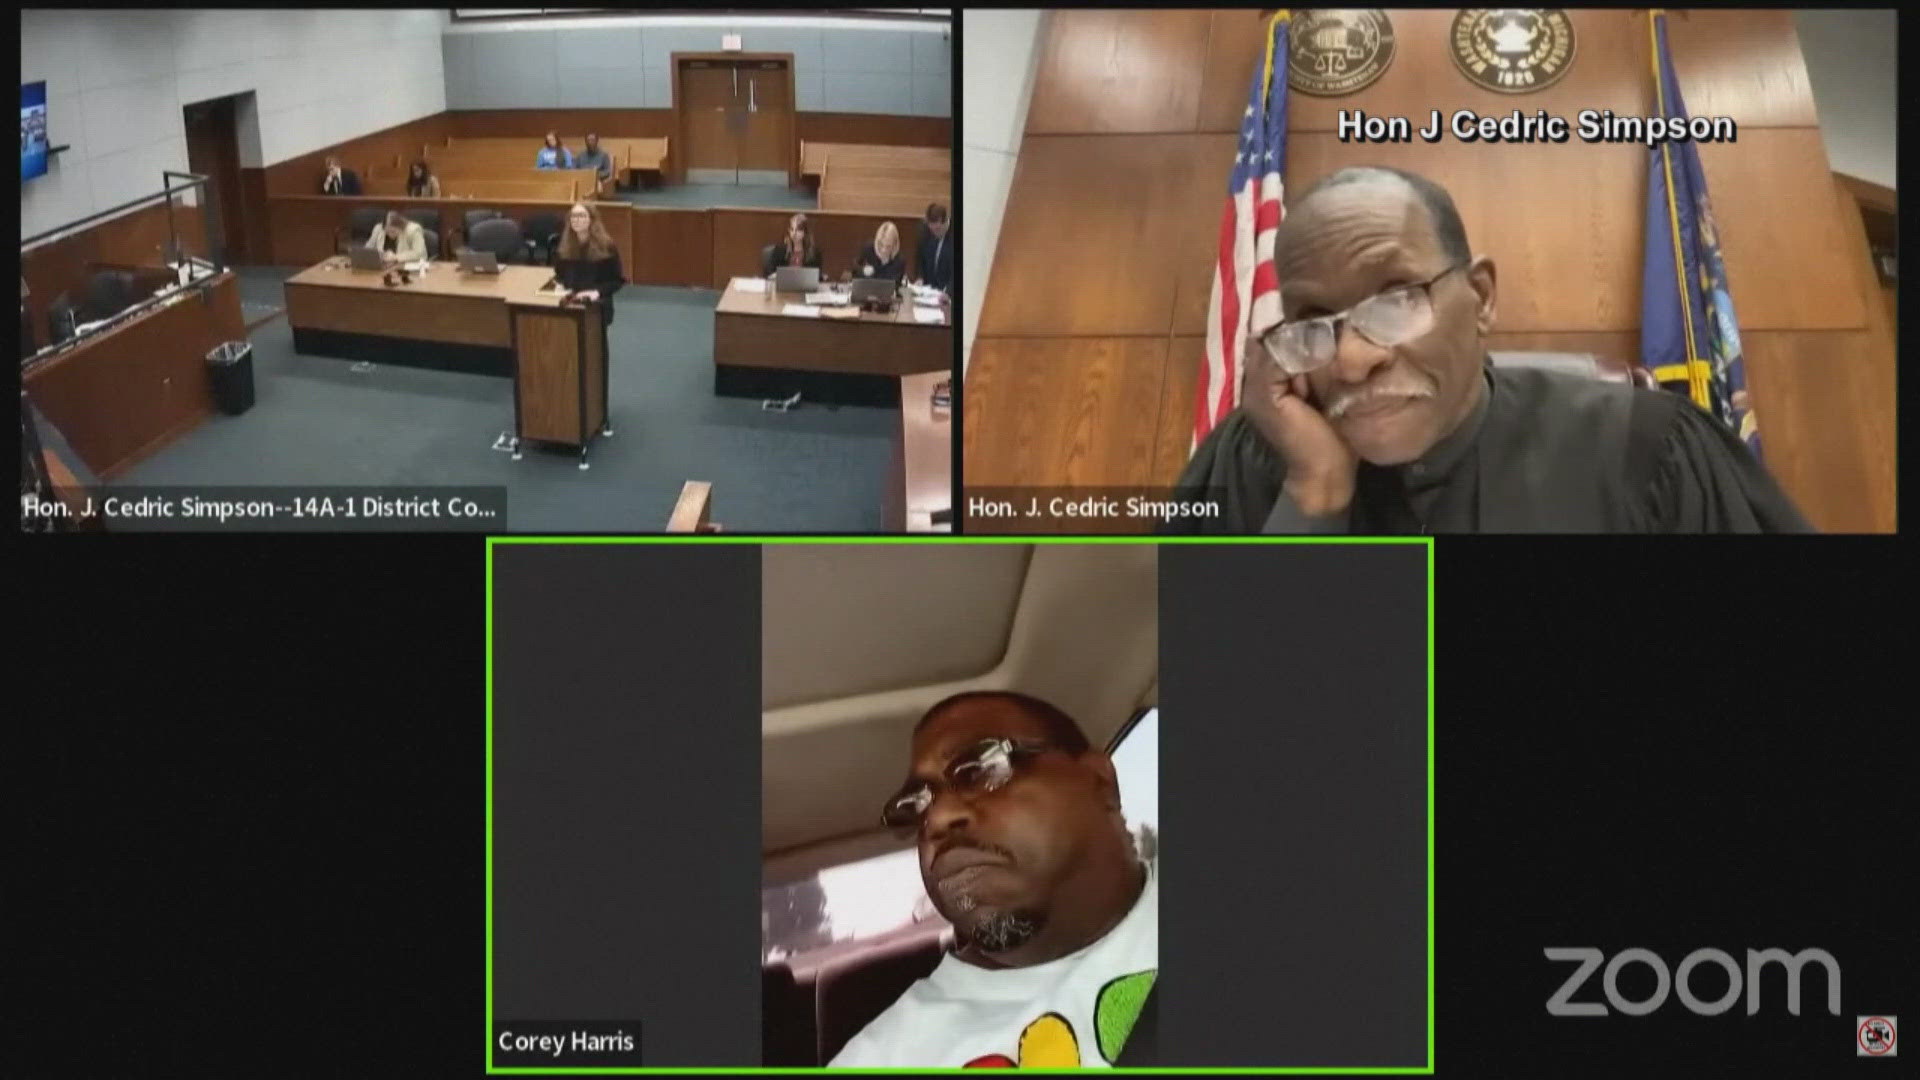 The judge immediately interjected when Corey Harris joined his May 15 court hearing via Zoom with a visible seatbelt, clearly driving a car.